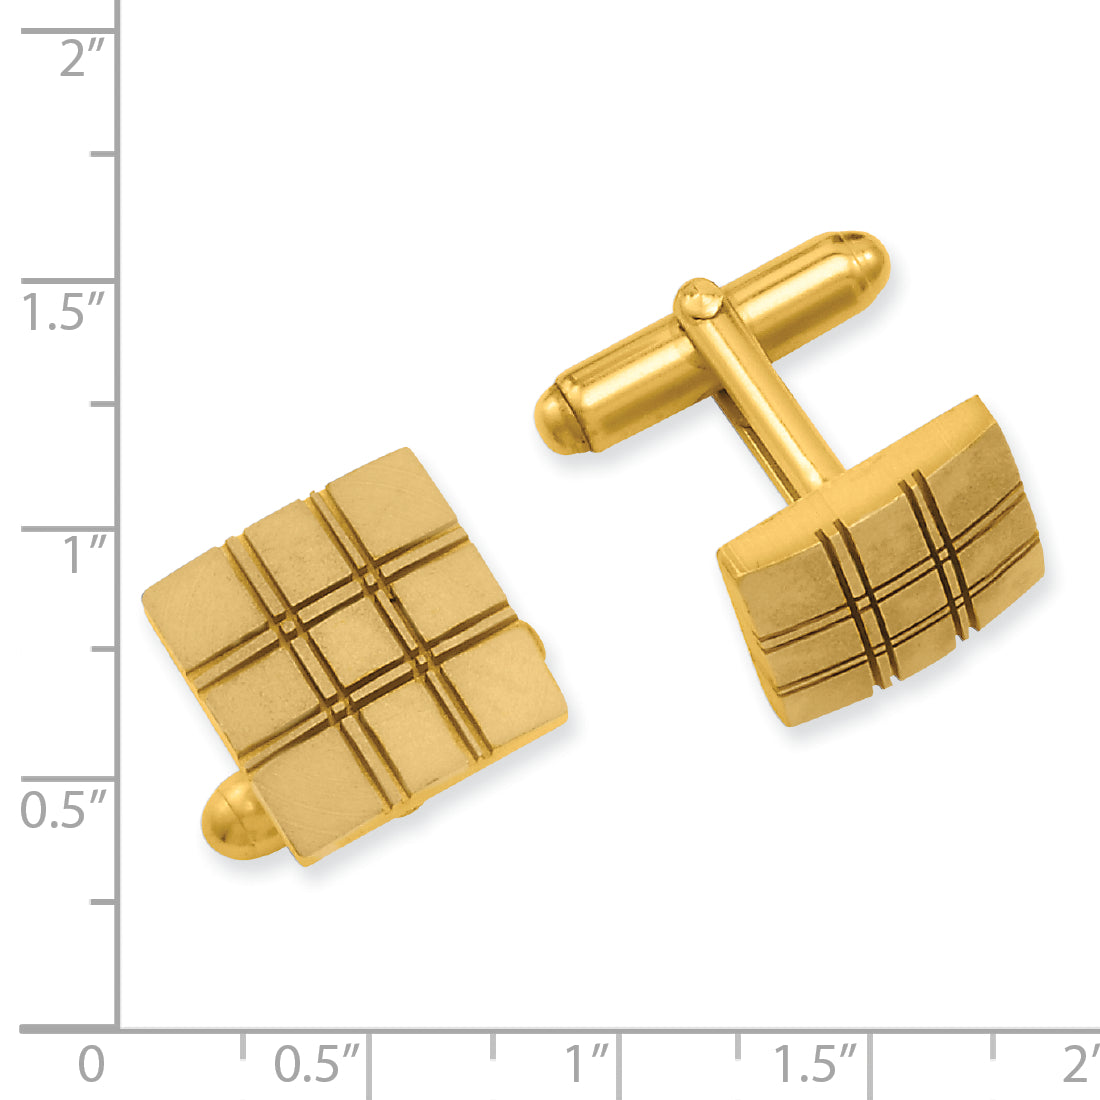 Kelly Waters Gold-plated Double Lines Patterned Square Cuff Links